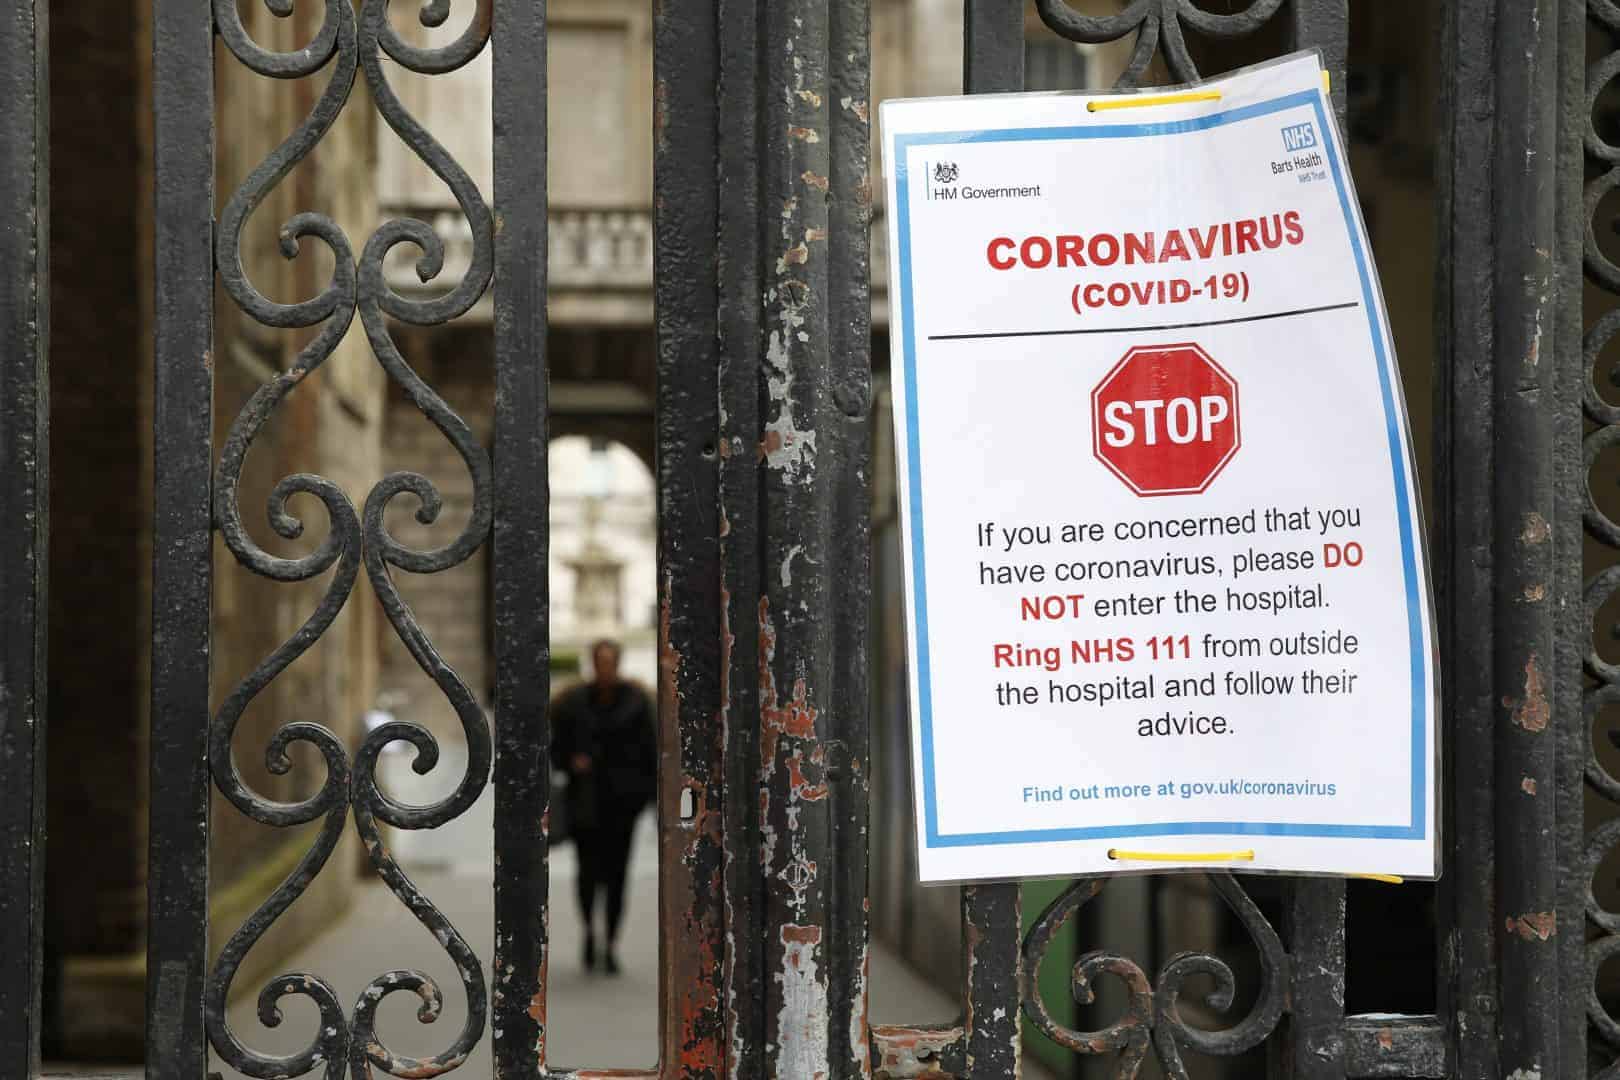 Coronavirus UK: Wales reports first death as UK cases rise to 1,543